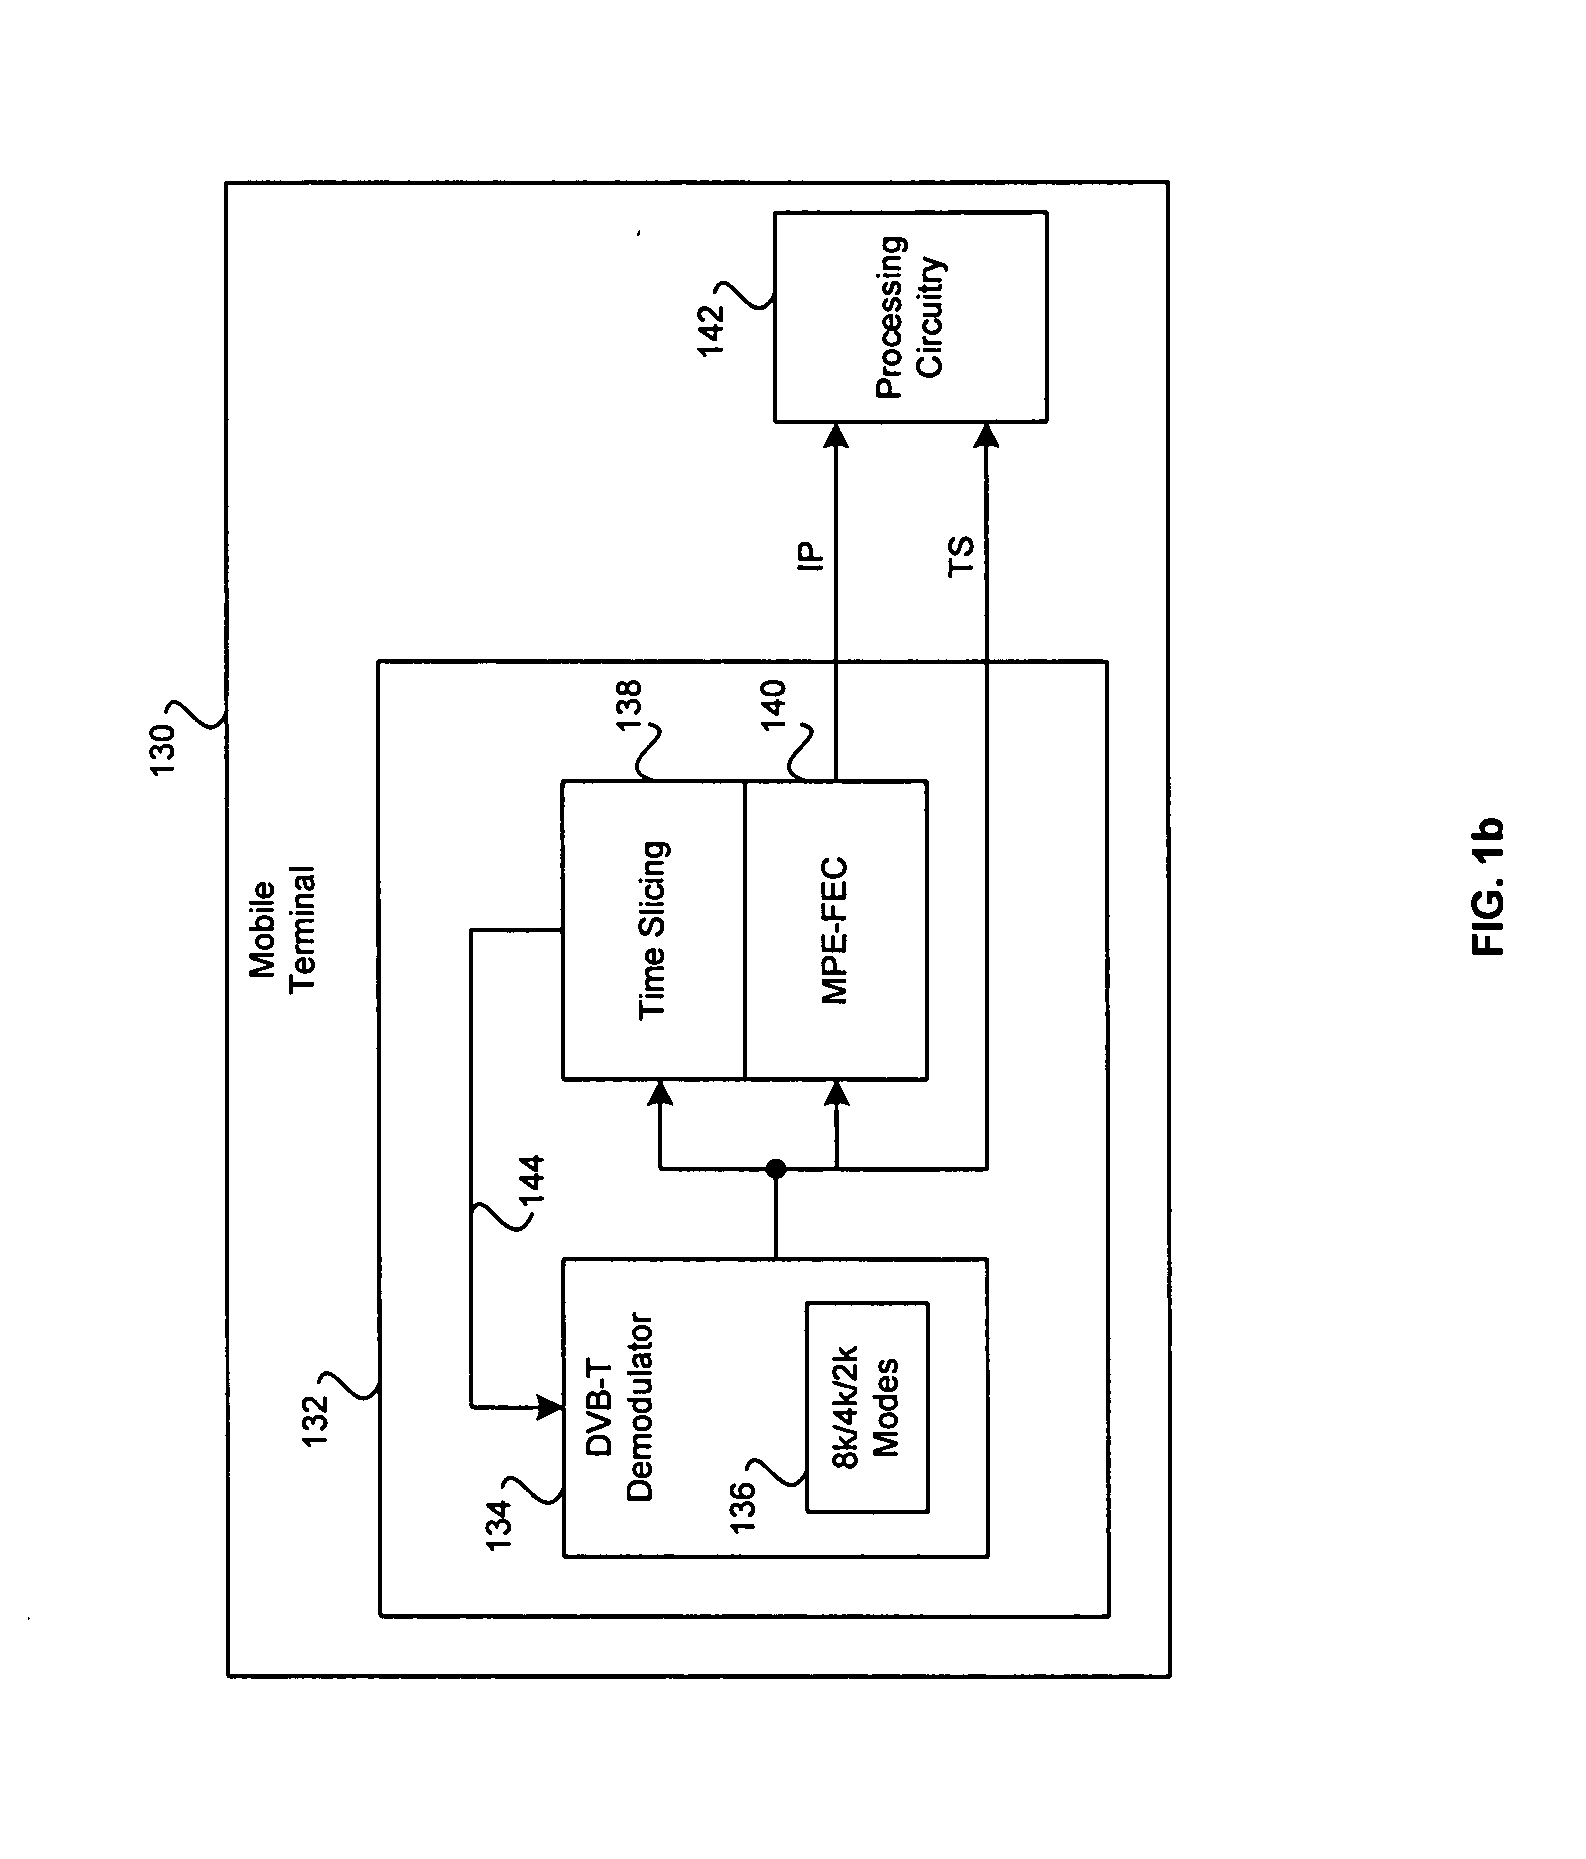 Method and system for cellular network and integrated broadcast television (TV) downlink with intelligent service control with feedback information